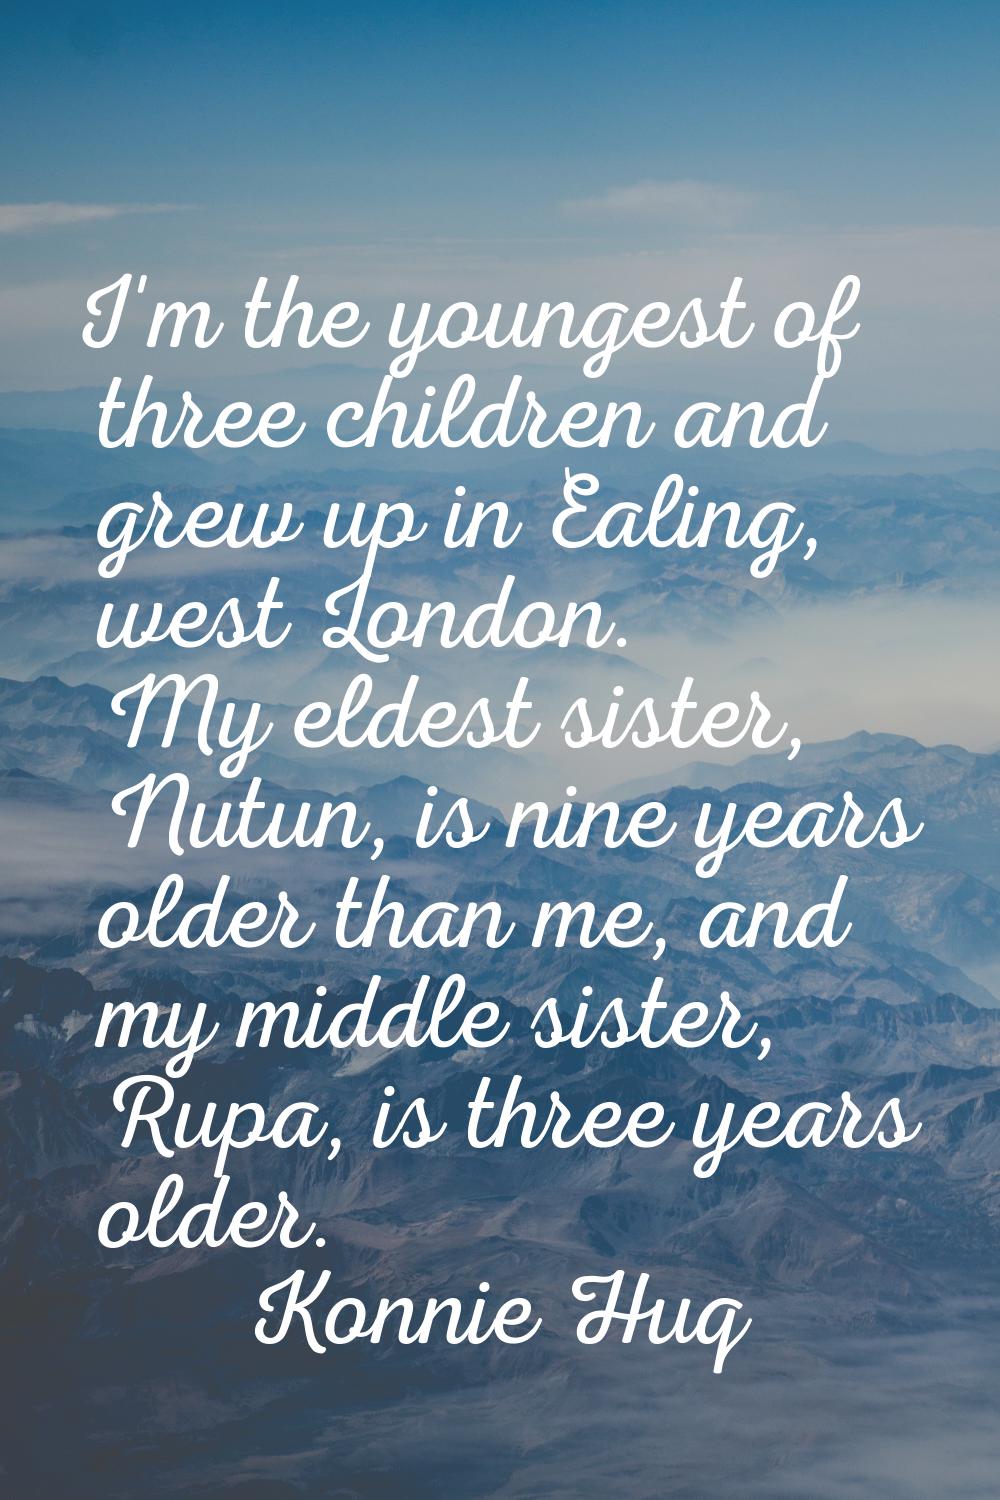 I'm the youngest of three children and grew up in Ealing, west London. My eldest sister, Nutun, is 